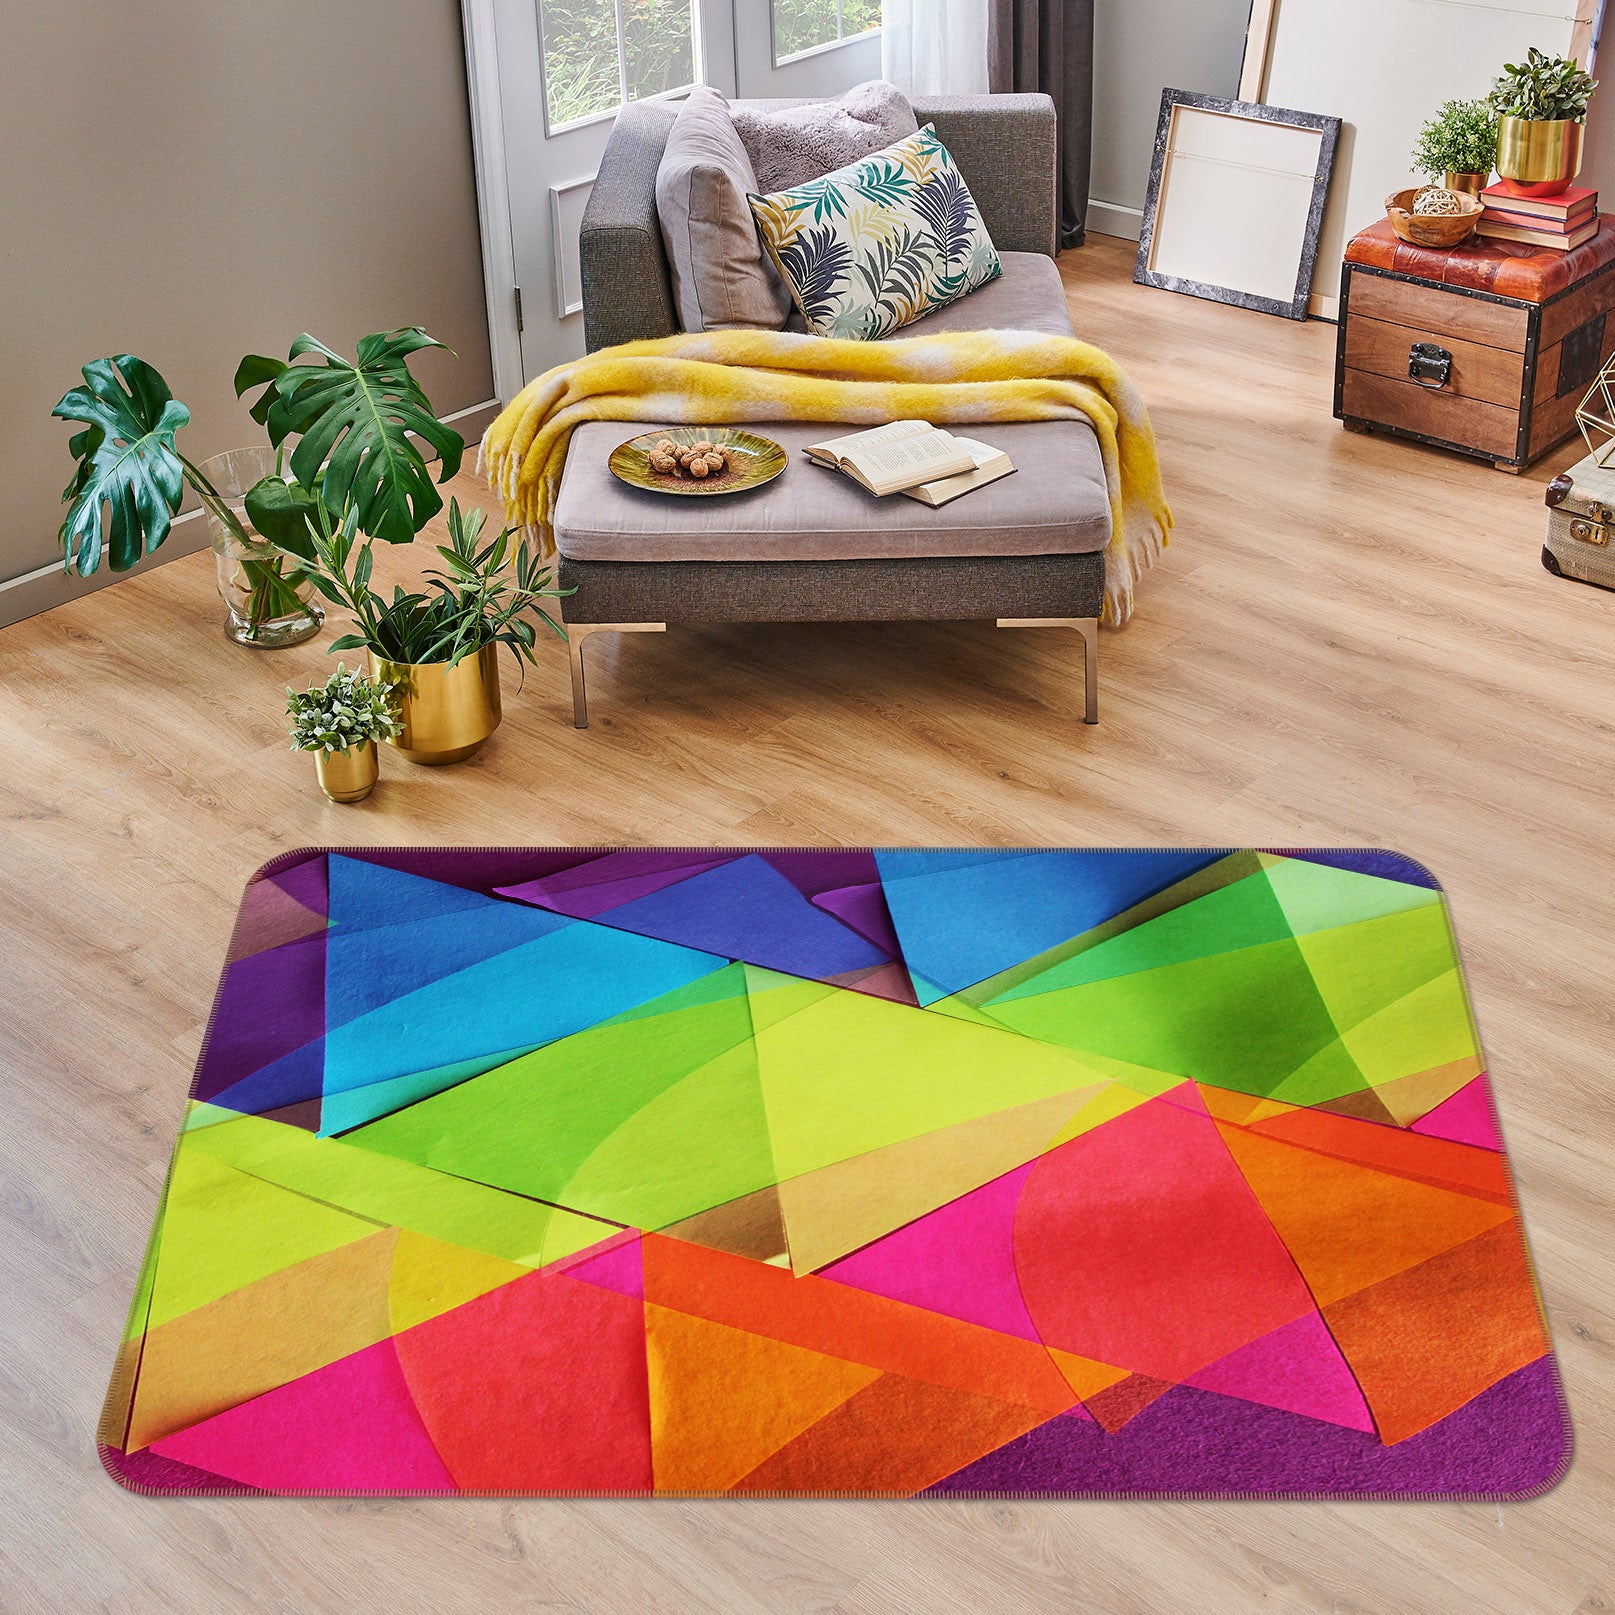 3D Colored Triangle 70056 Shandra Smith Rug Non Slip Rug Mat